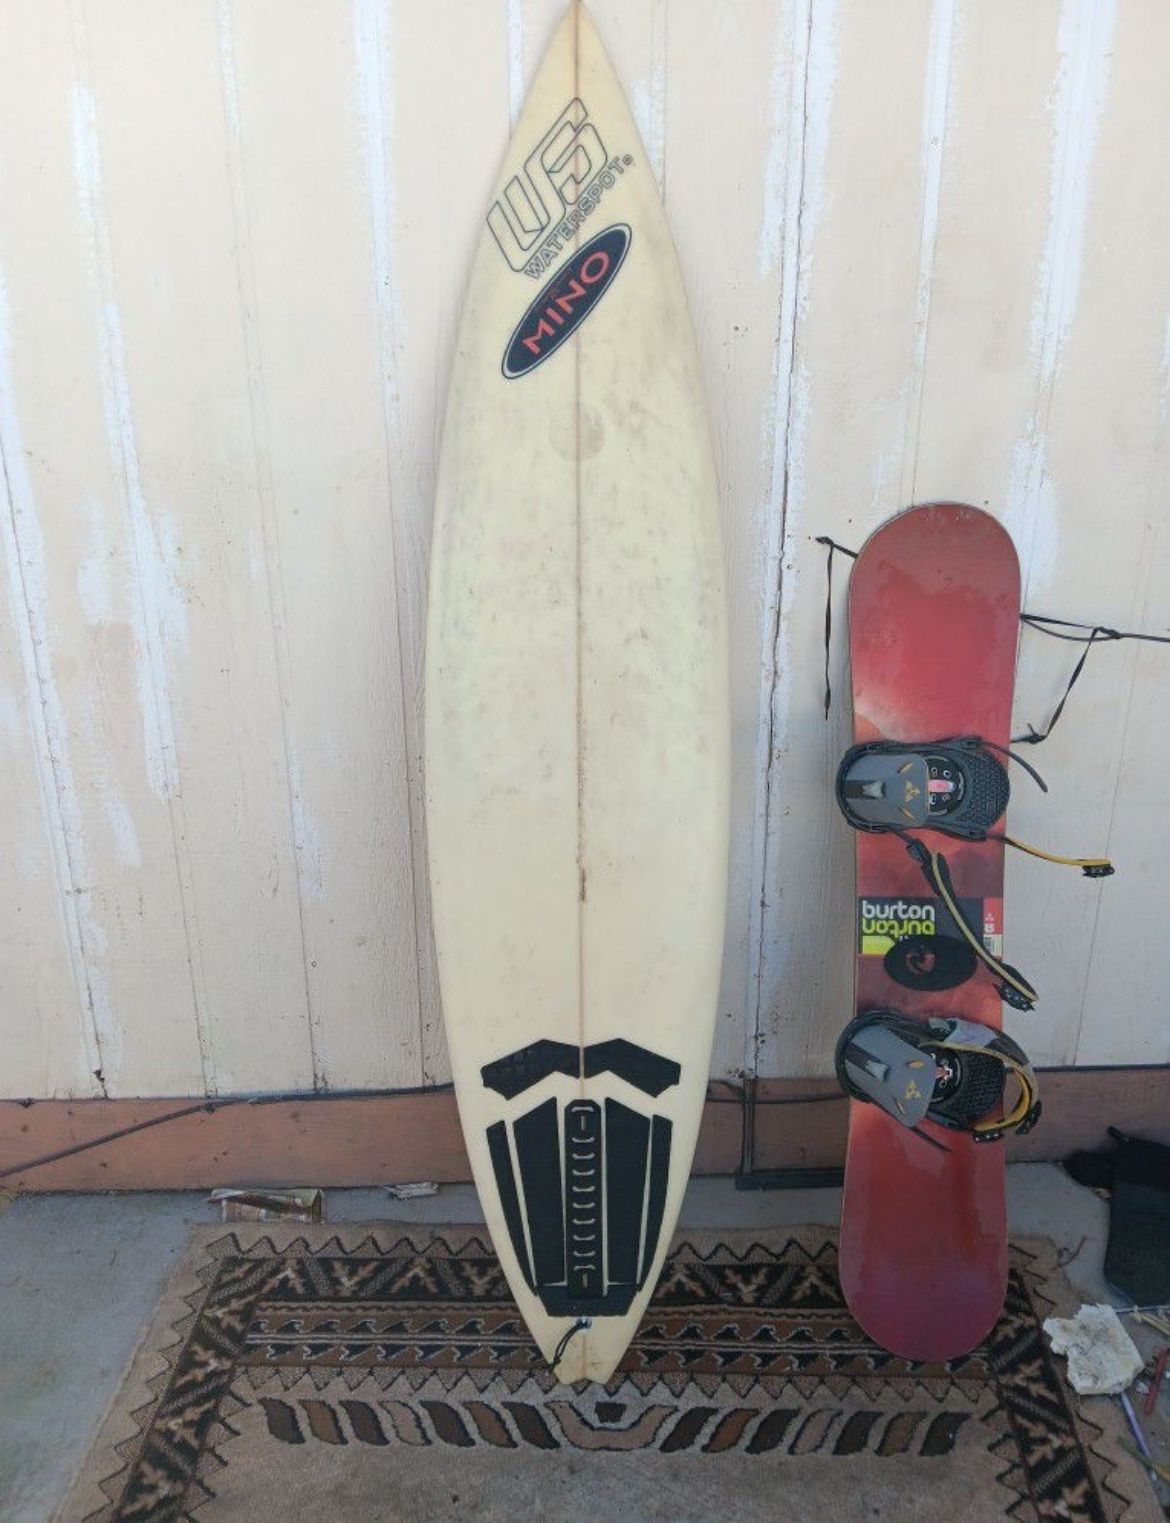 Snowboard And Surfboard 